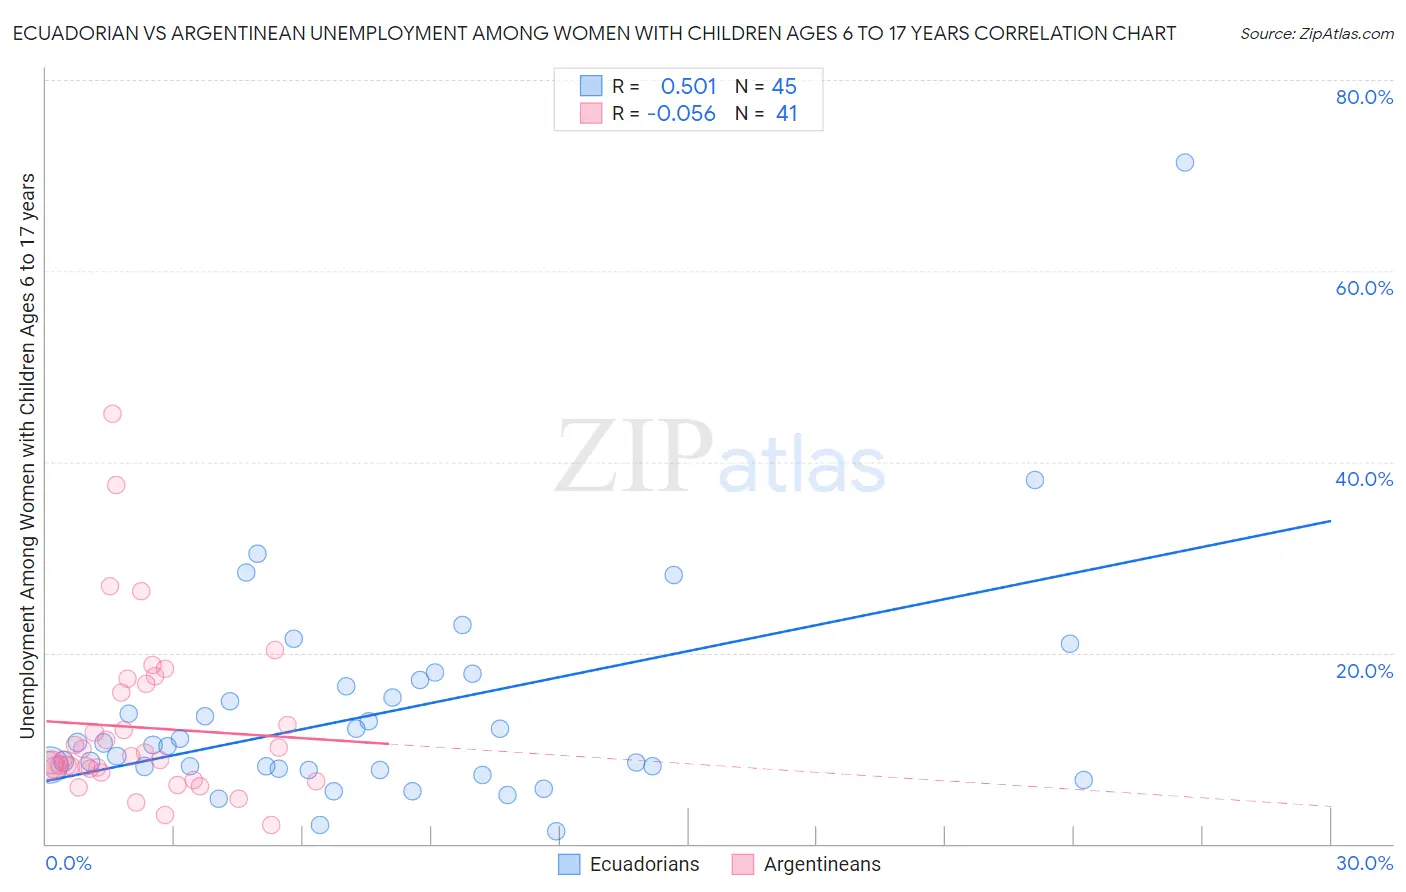 Ecuadorian vs Argentinean Unemployment Among Women with Children Ages 6 to 17 years